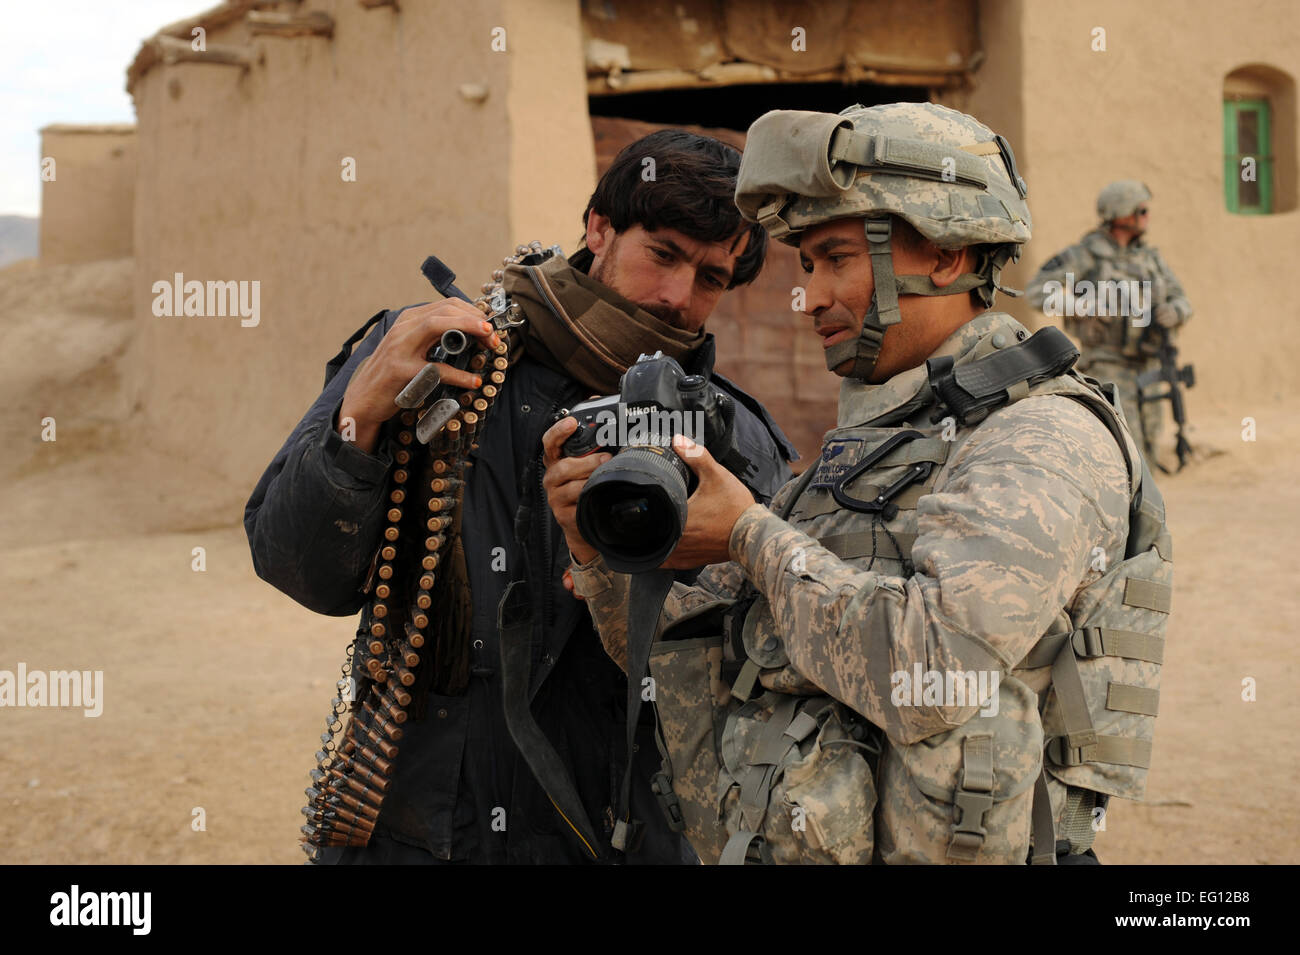 U.S. Air Force Tech. Sgt. Efren Lopez, 4th Combat Camera Squadron, shows digital photographs to an Afghan National Army soldier in the village of Shabila Kalan, Zabul Province, Afghanistan, Nov. 30, 2009.  Staff Sgt. Christine Jones Stock Photo